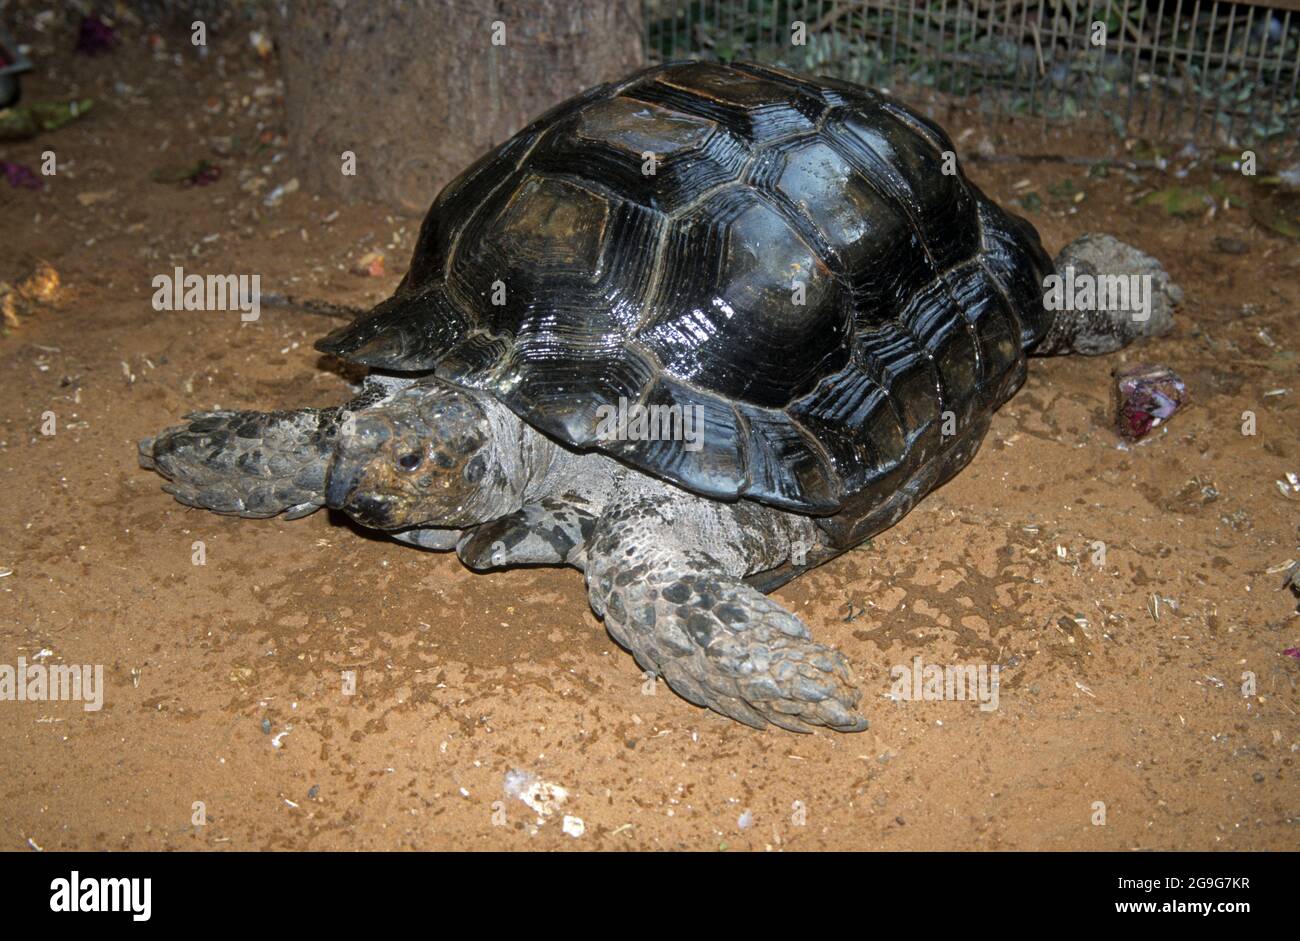 The Asian forest tortoise (Manouria emys), also known commonly as the Asian brown tortoise, is a species of tortoise in the family Testudinidae. The s Stock Photo